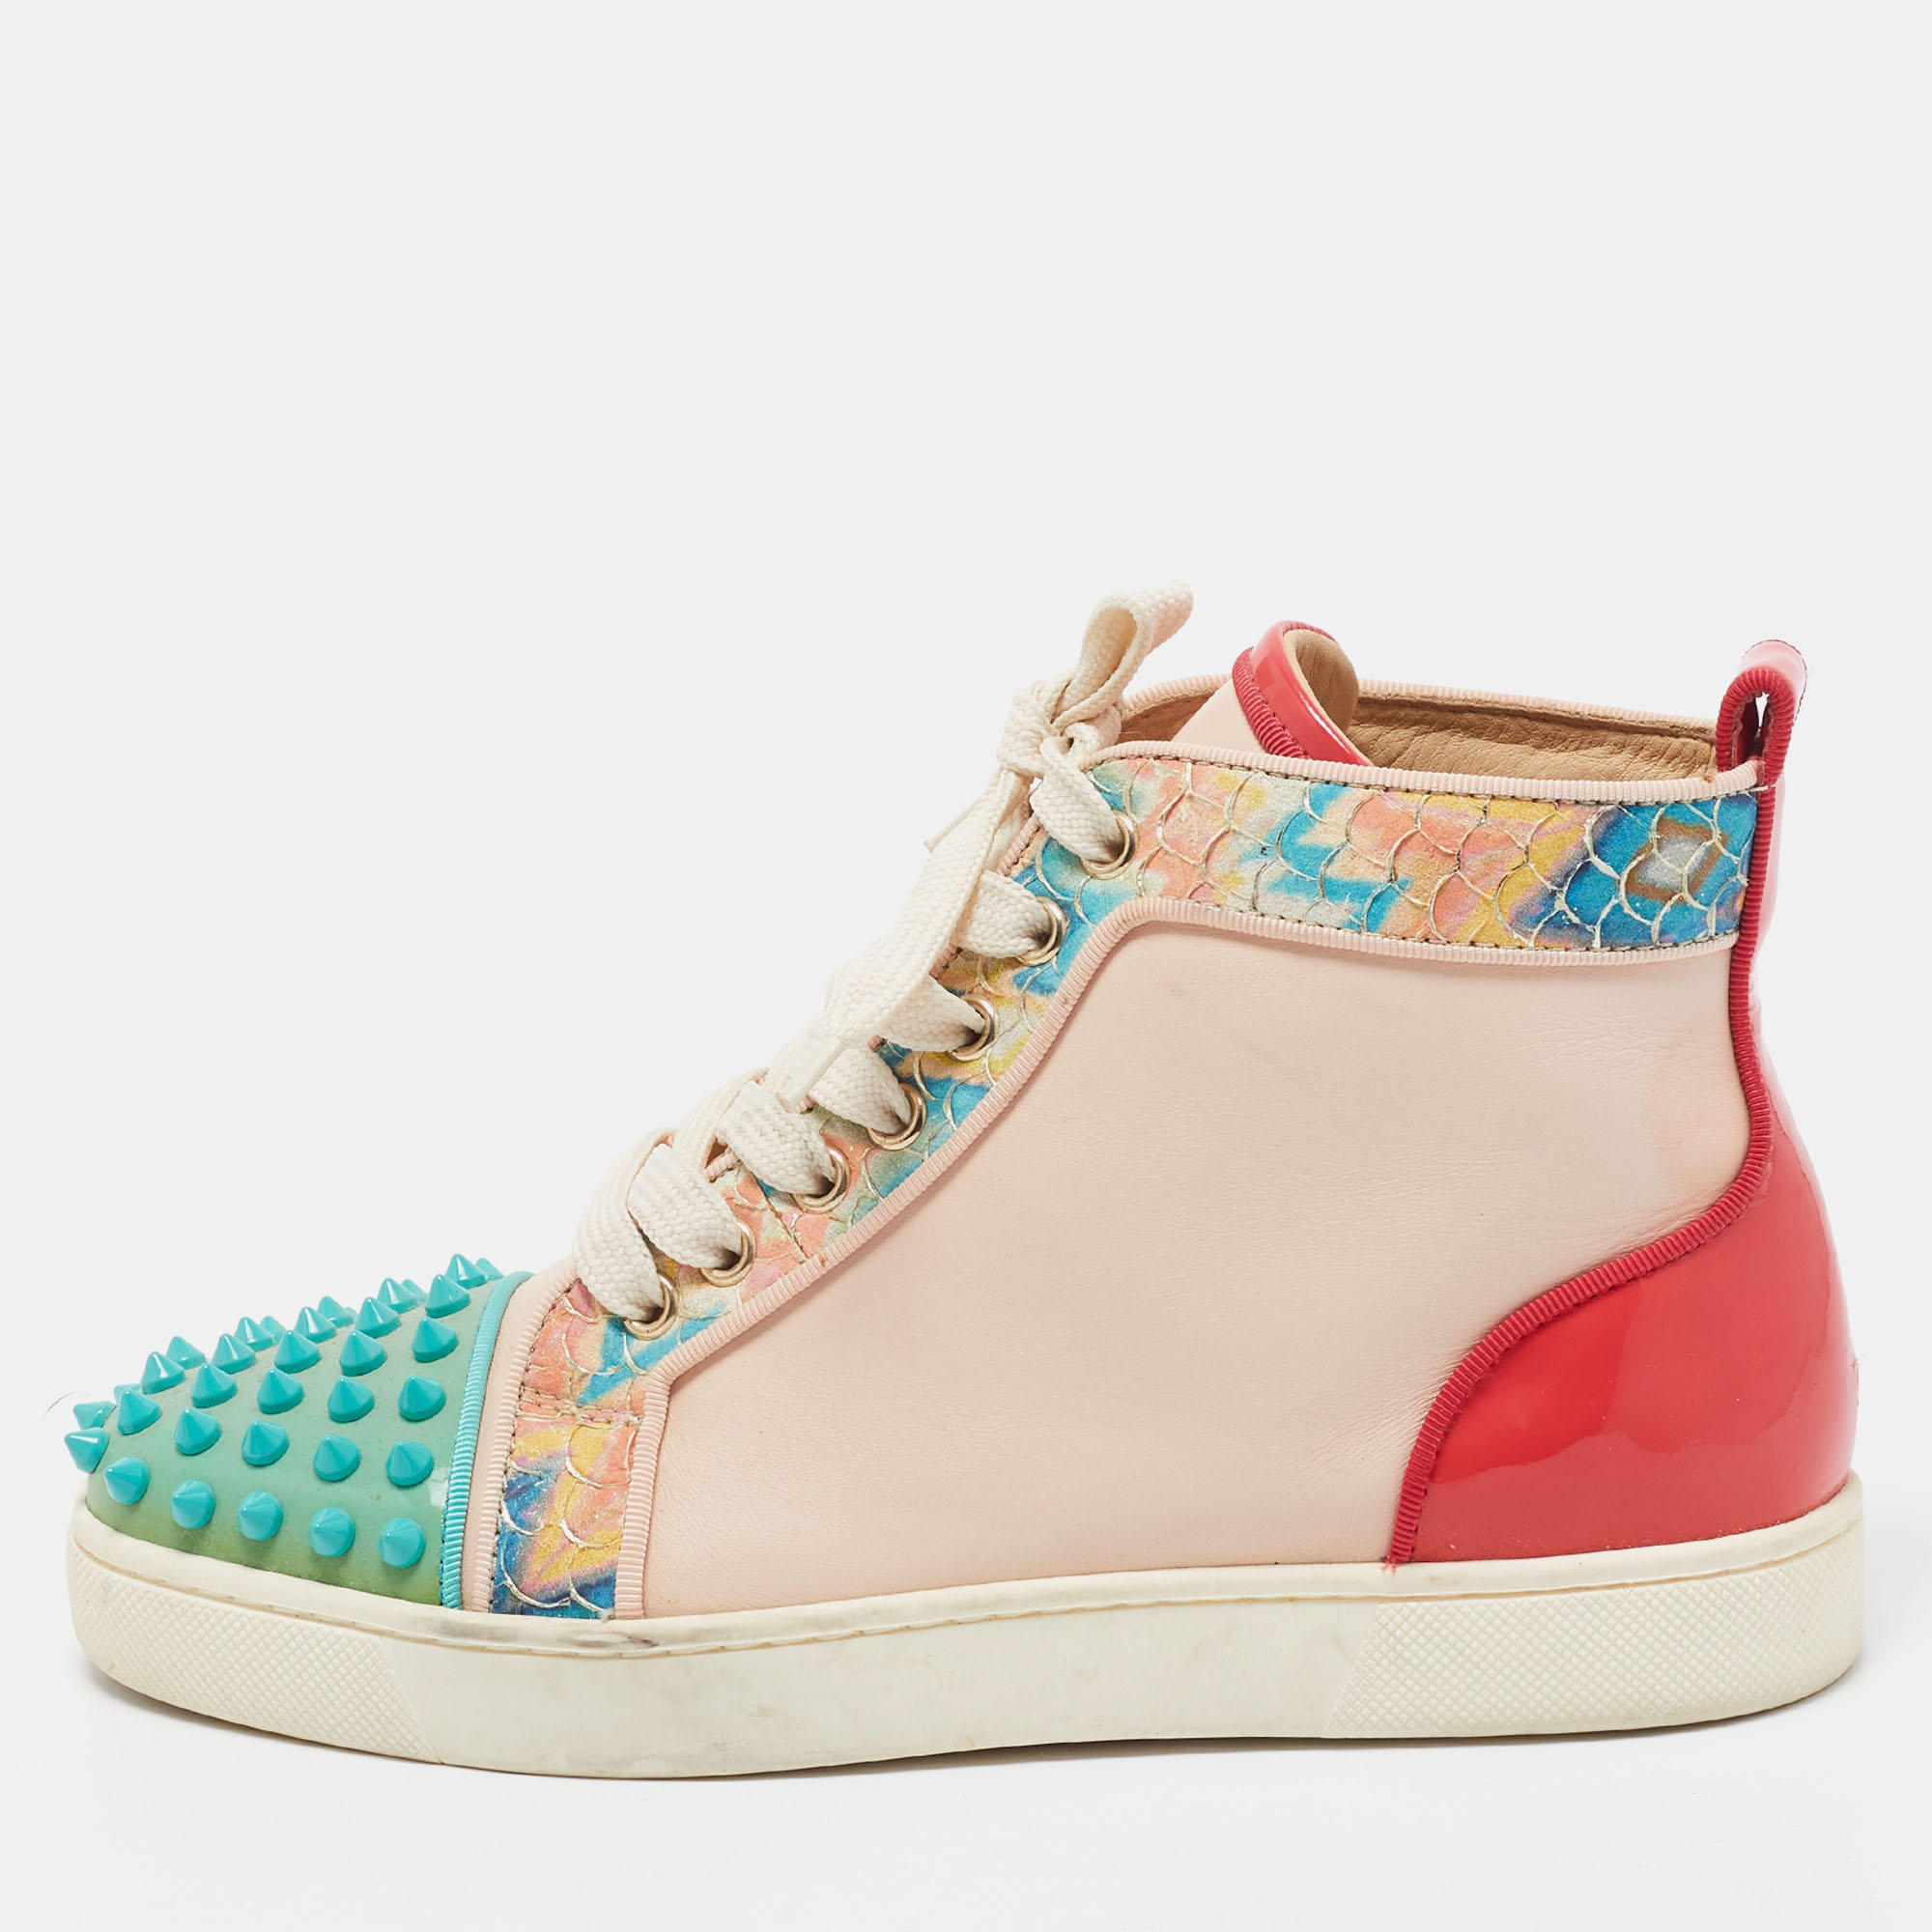 Pre-owned Christian Louboutin Multicolor Patent And Leather Louis Spikes High Top Trainers Size 36.5